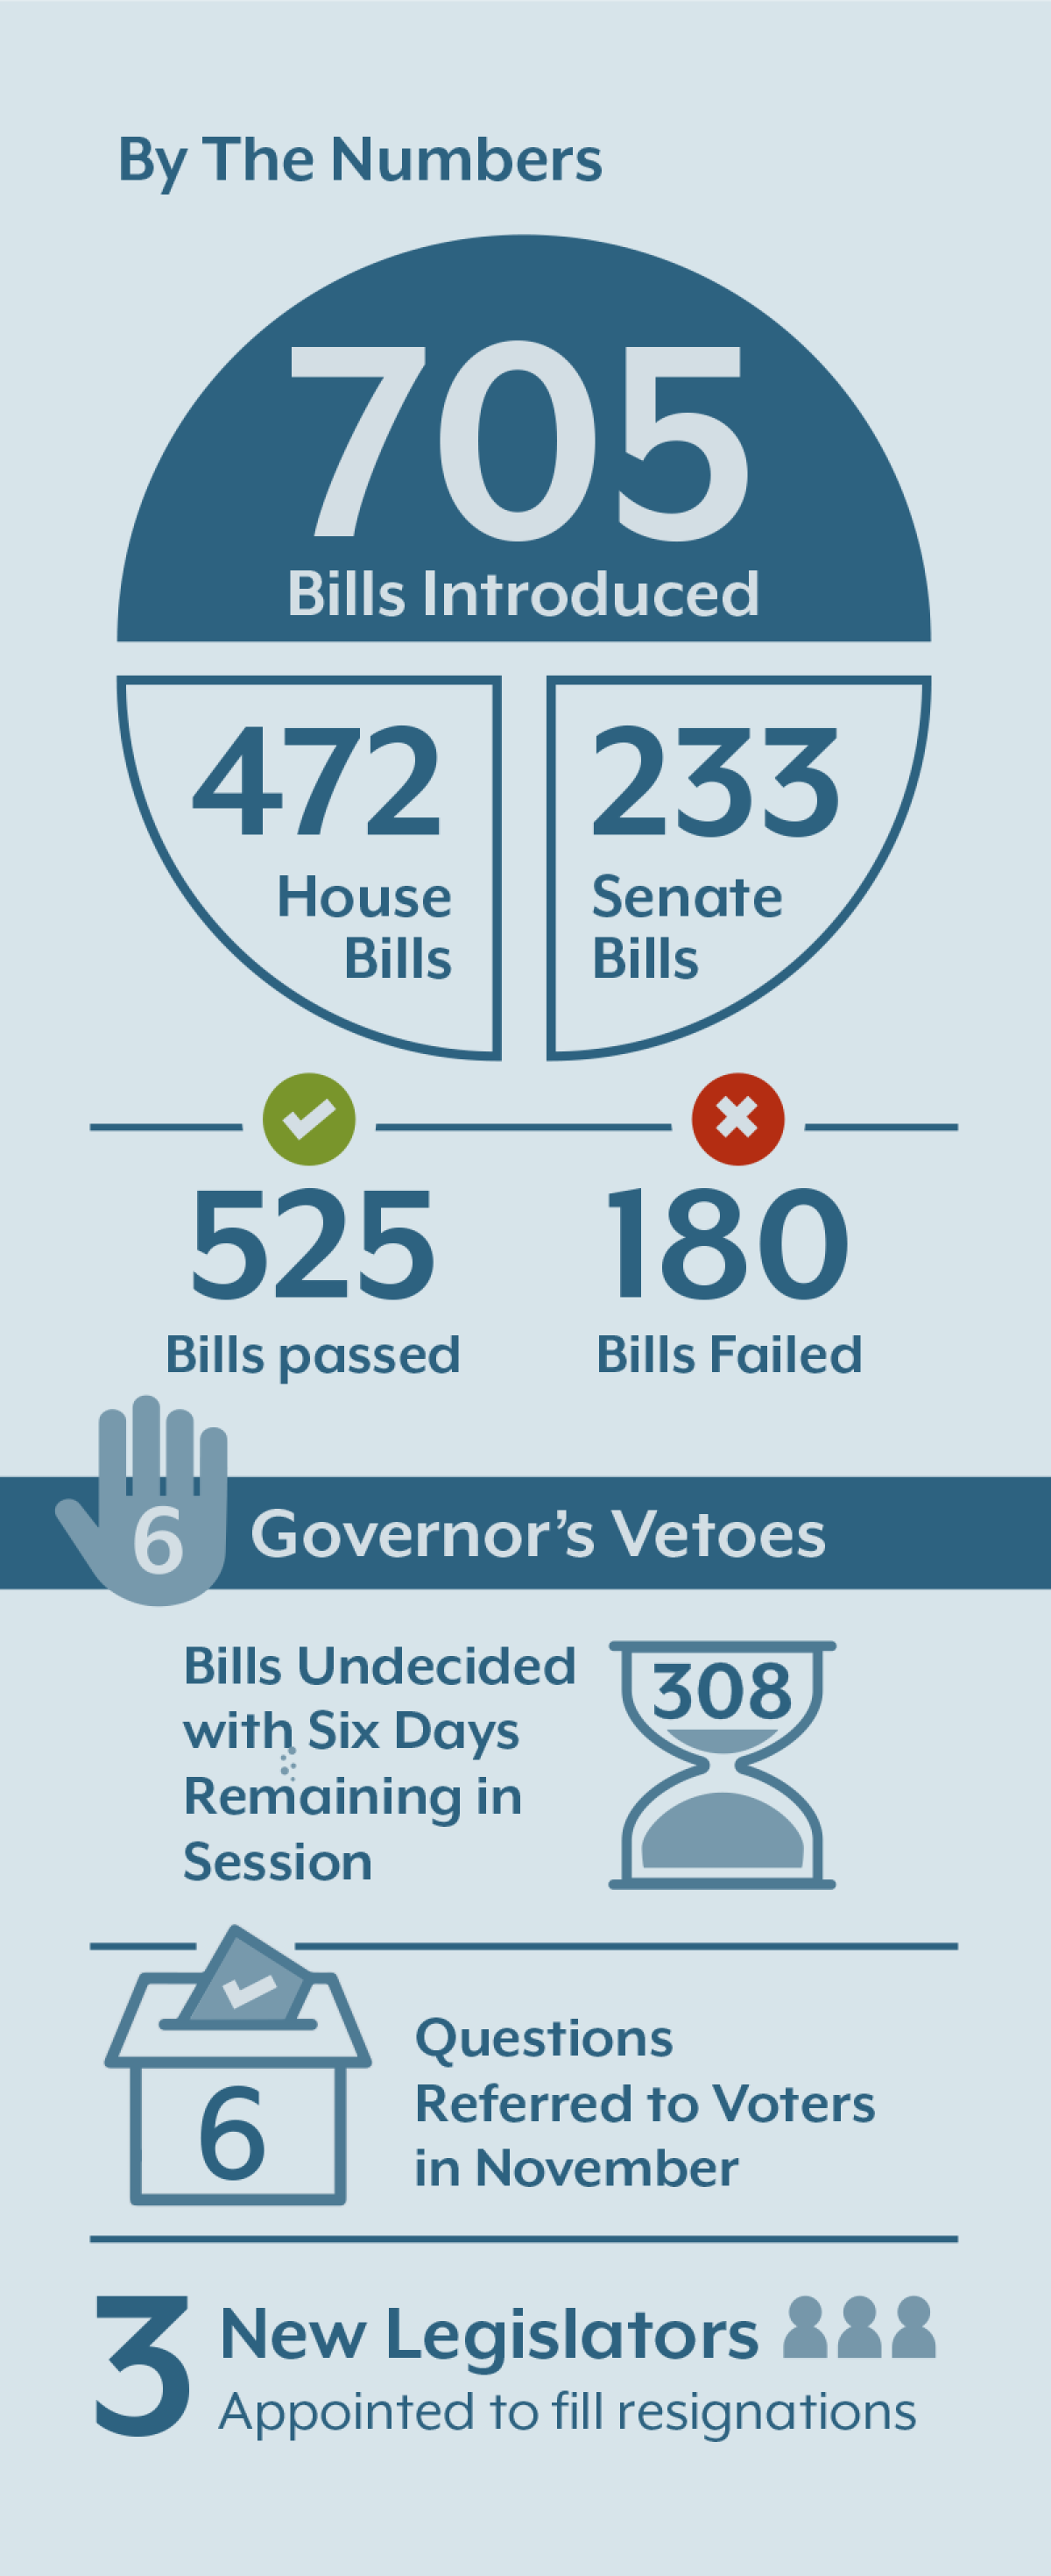 By the Numbers: 705 Bills introduced (472 House, 233 Senate), 525 bills passed 180 bills failed, 6 governor's vetoes, 308 bills undecided with 6 days remaining in session, 6 questions referred to voters in November, 3 new legislators appointed to fill resignations